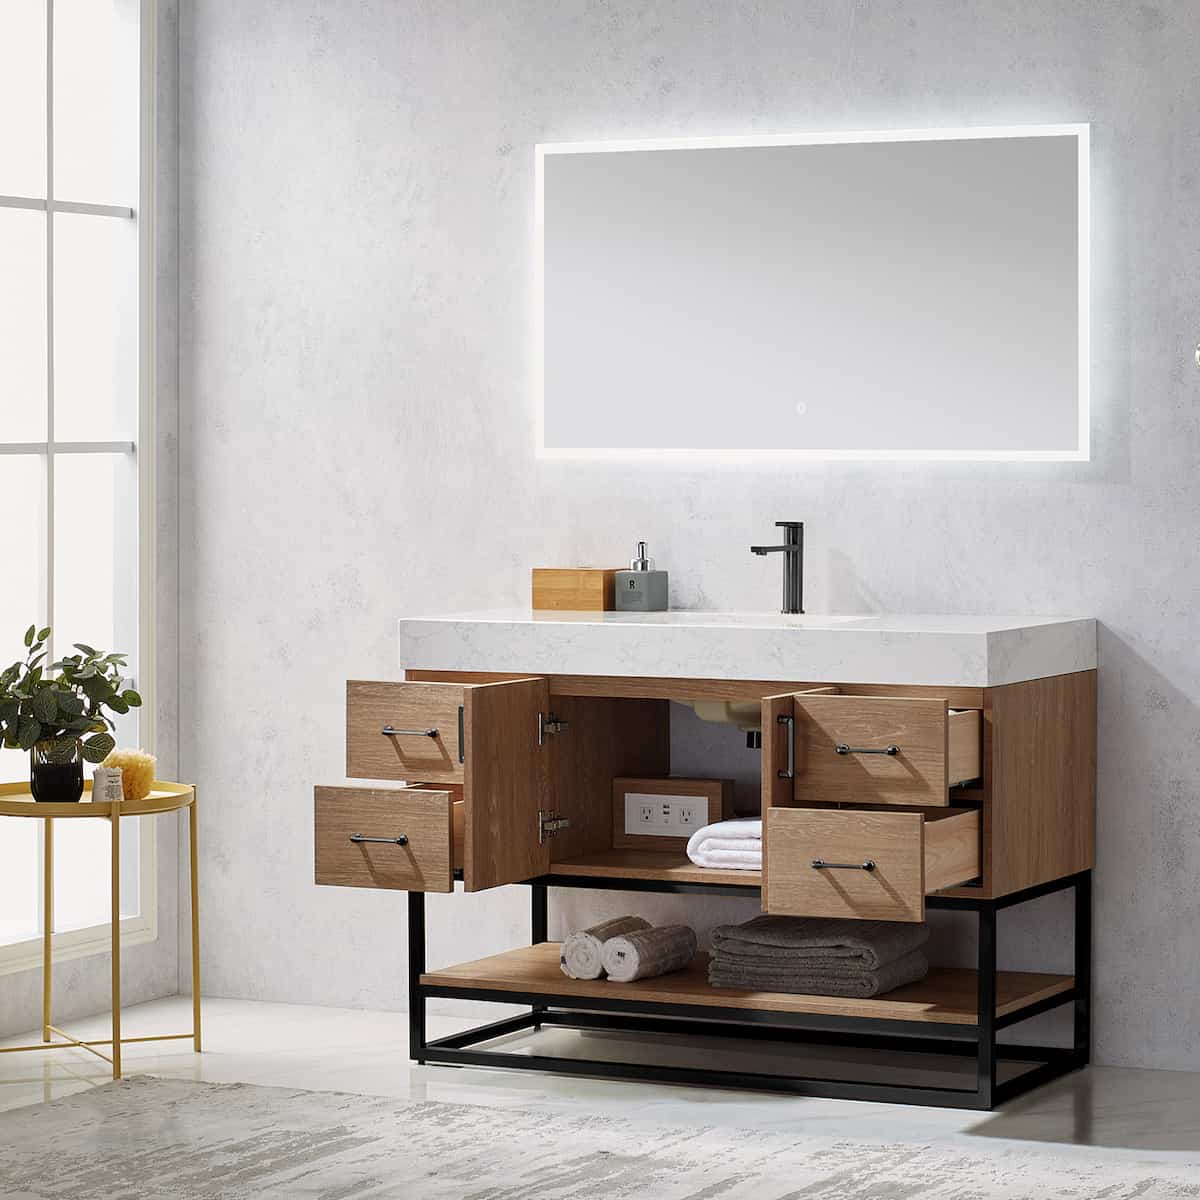 Vinnova Alistair 48 Inch Freestanding Single Vanity in North American Oak and Matte Black Frame with White Grain Stone Countertop With Mirror Inside 789048B-NO-GW